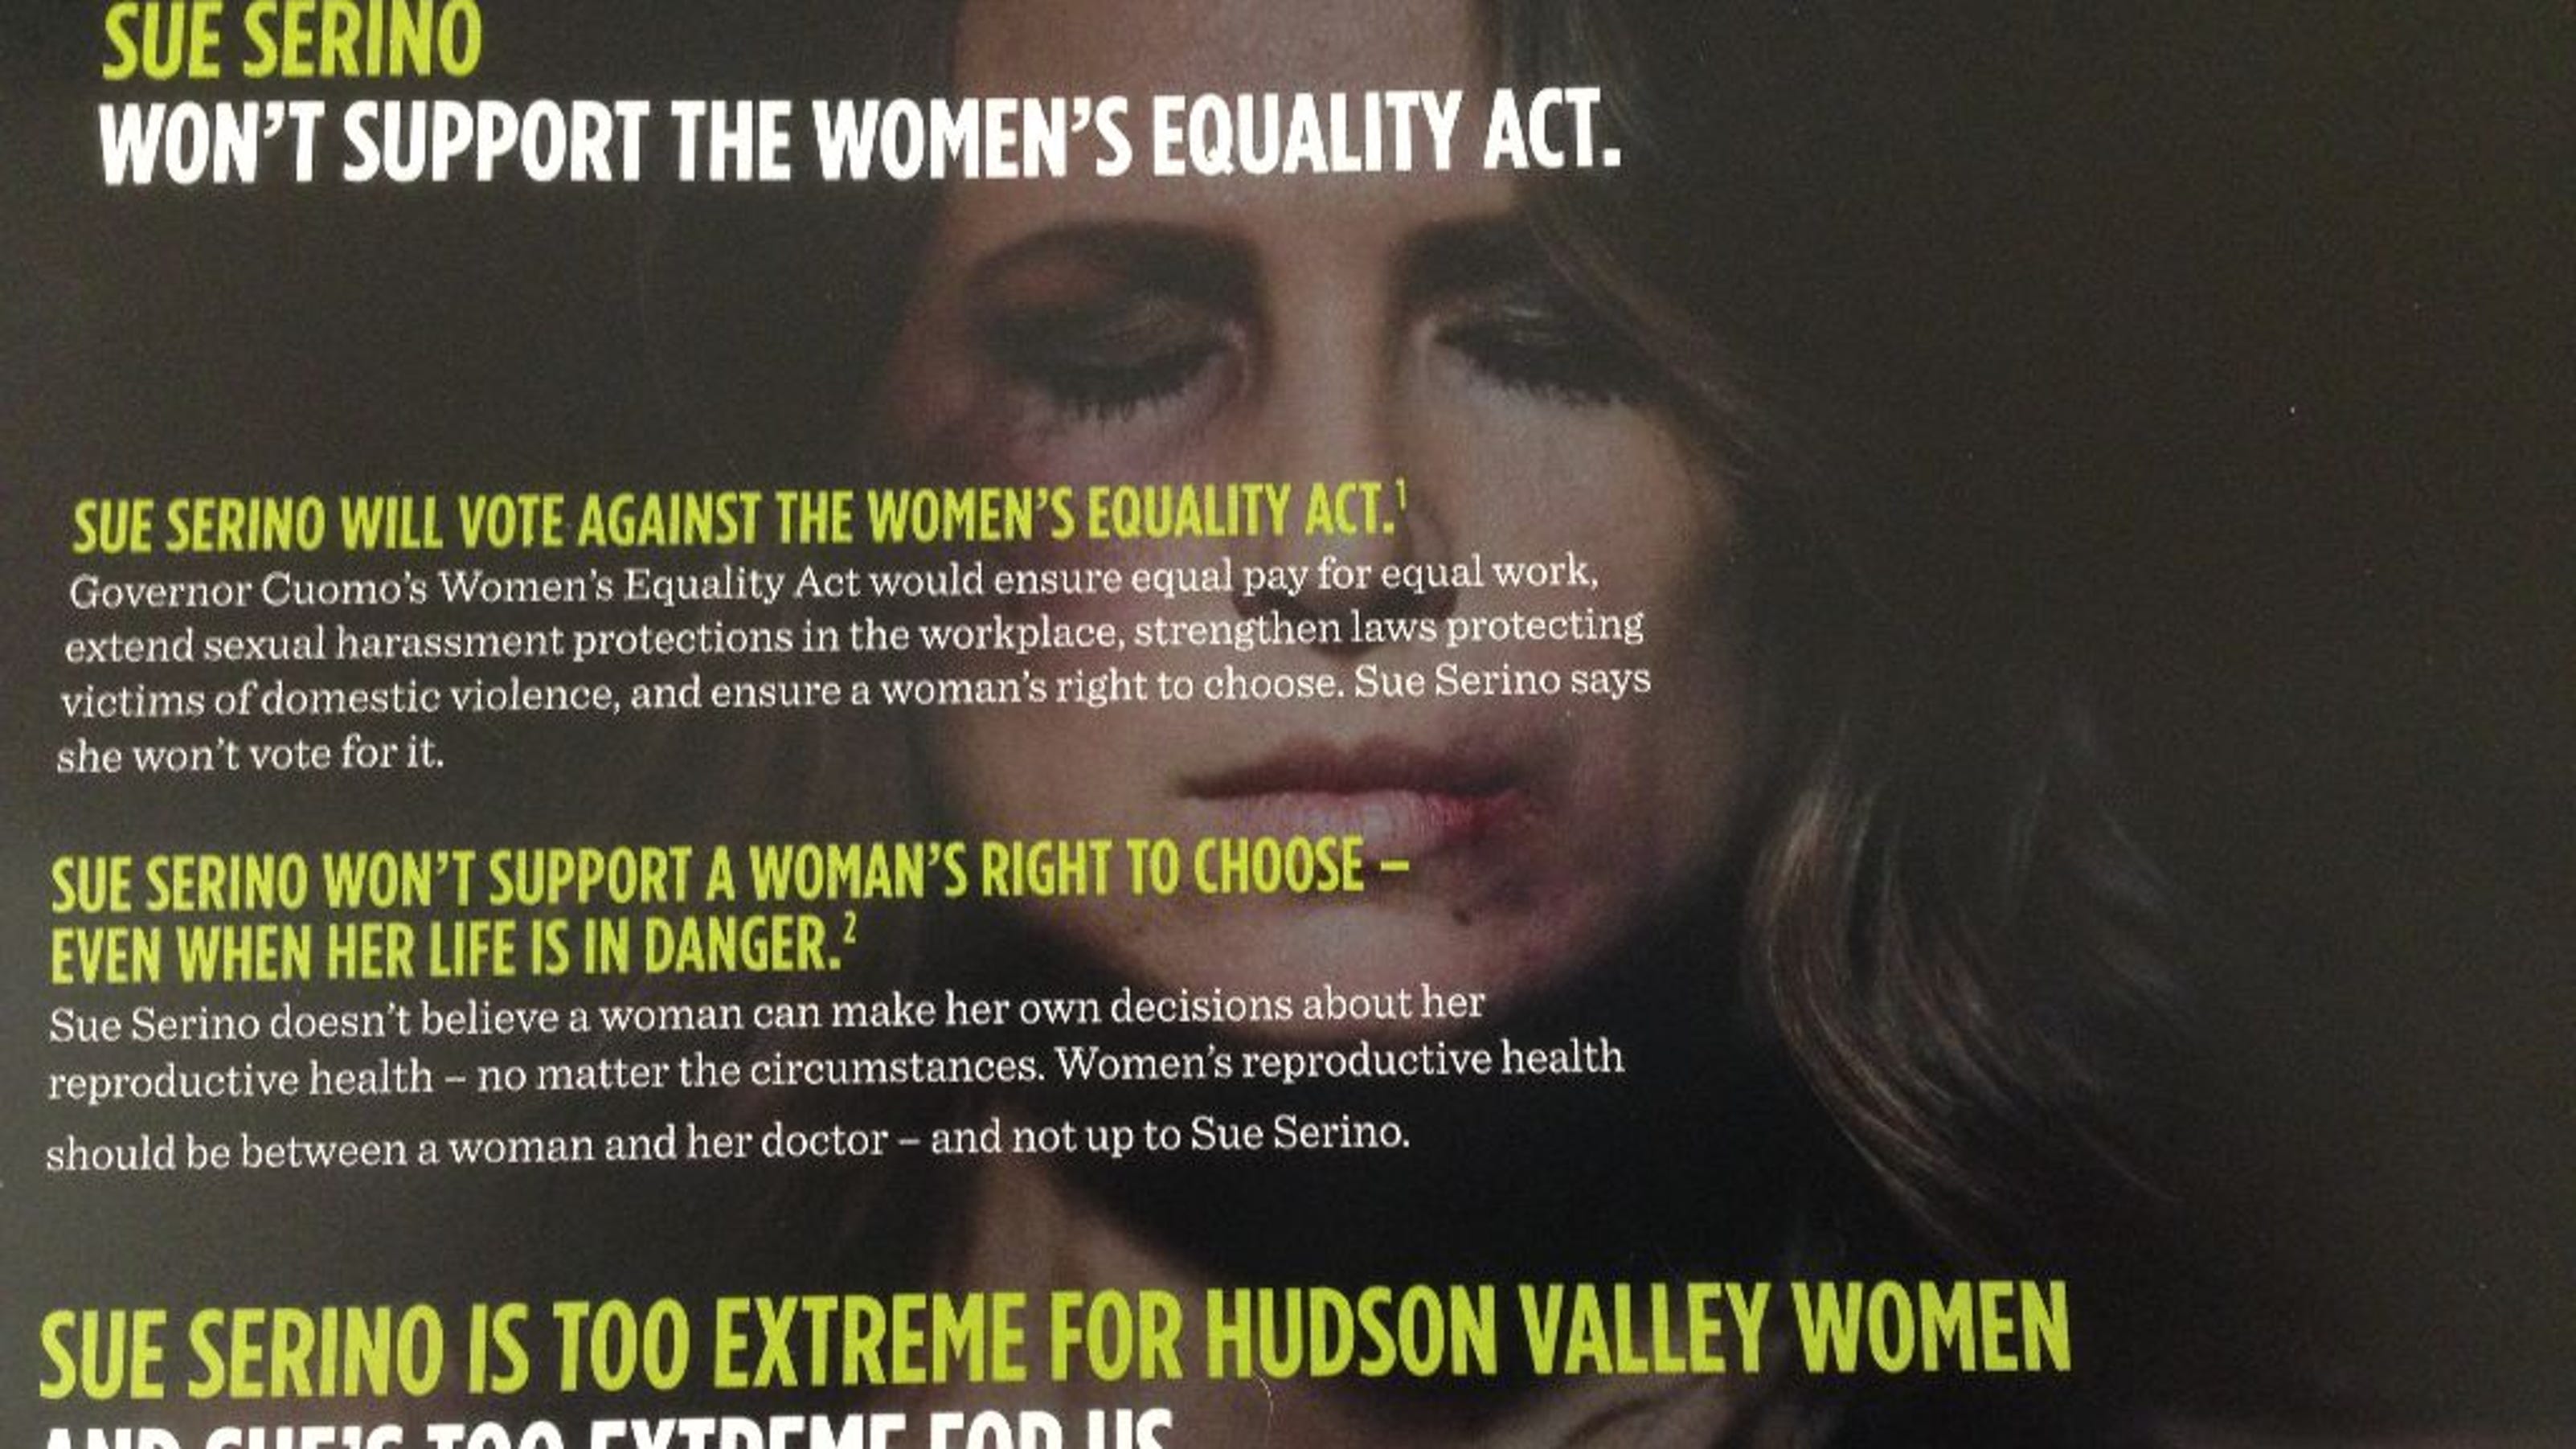 Union Using Images of Battered Women to Defeat Republicans3200 x 1800